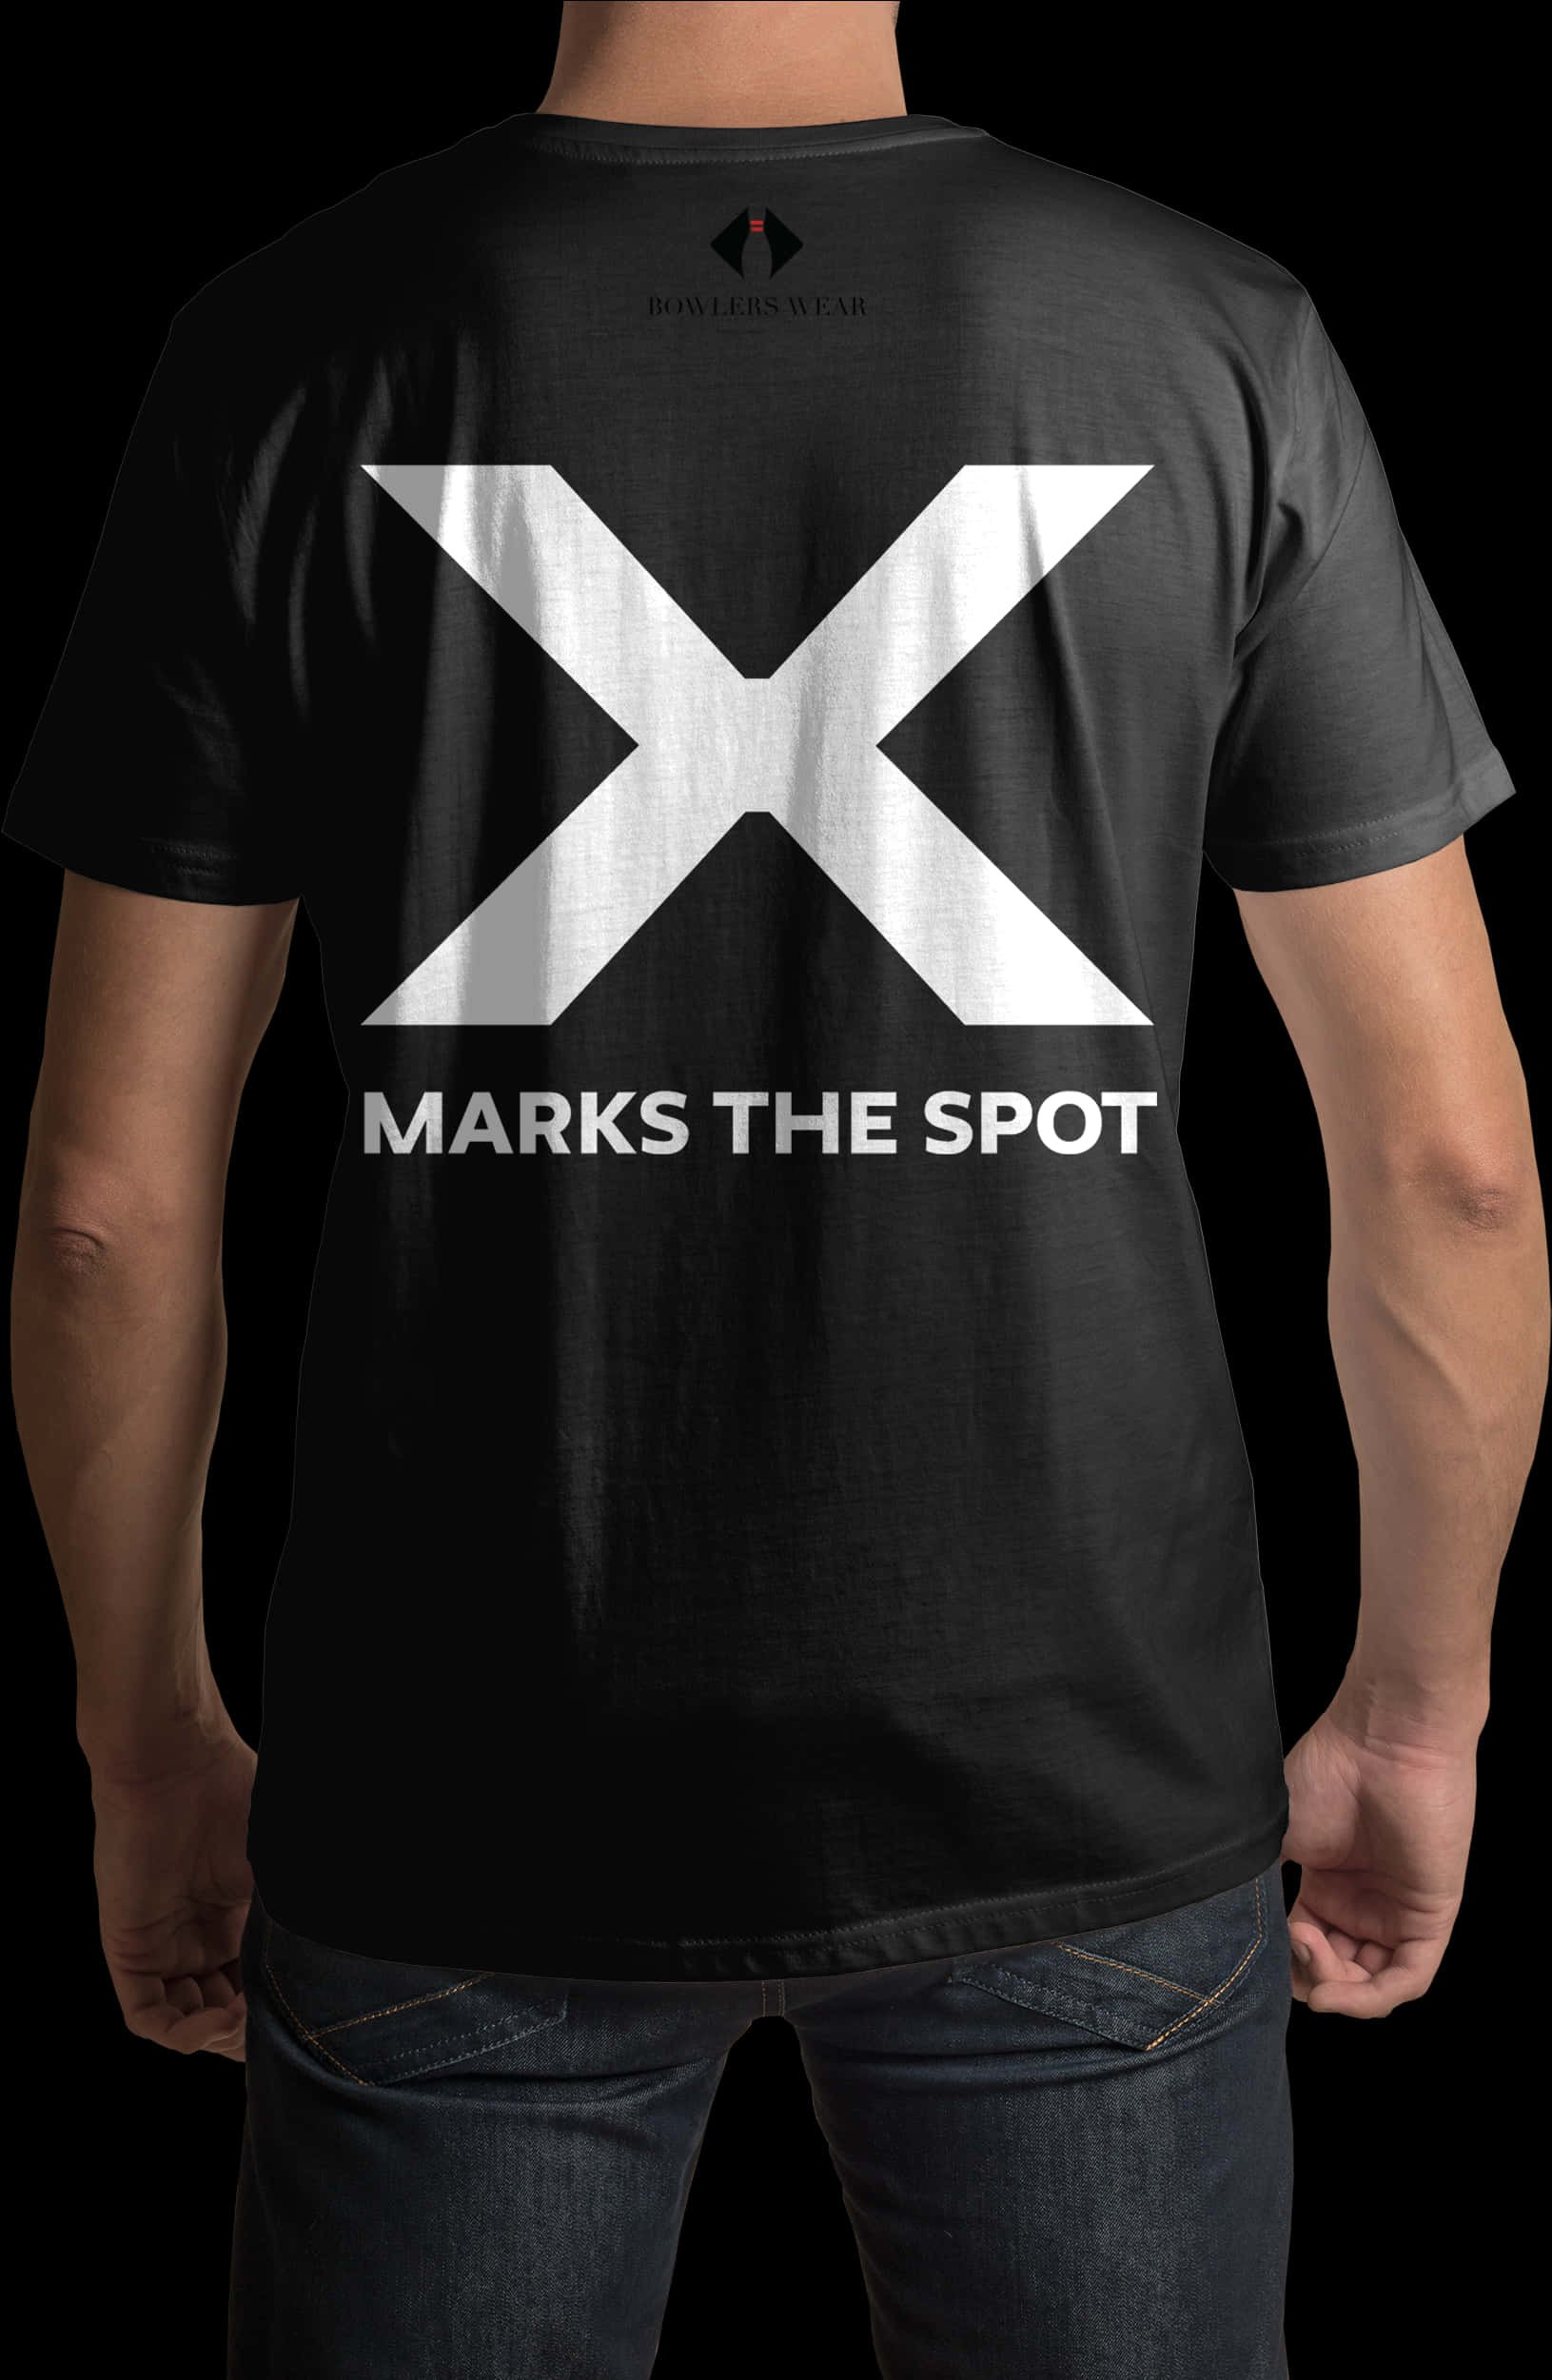 A Person Wearing A Black Shirt With White X On It